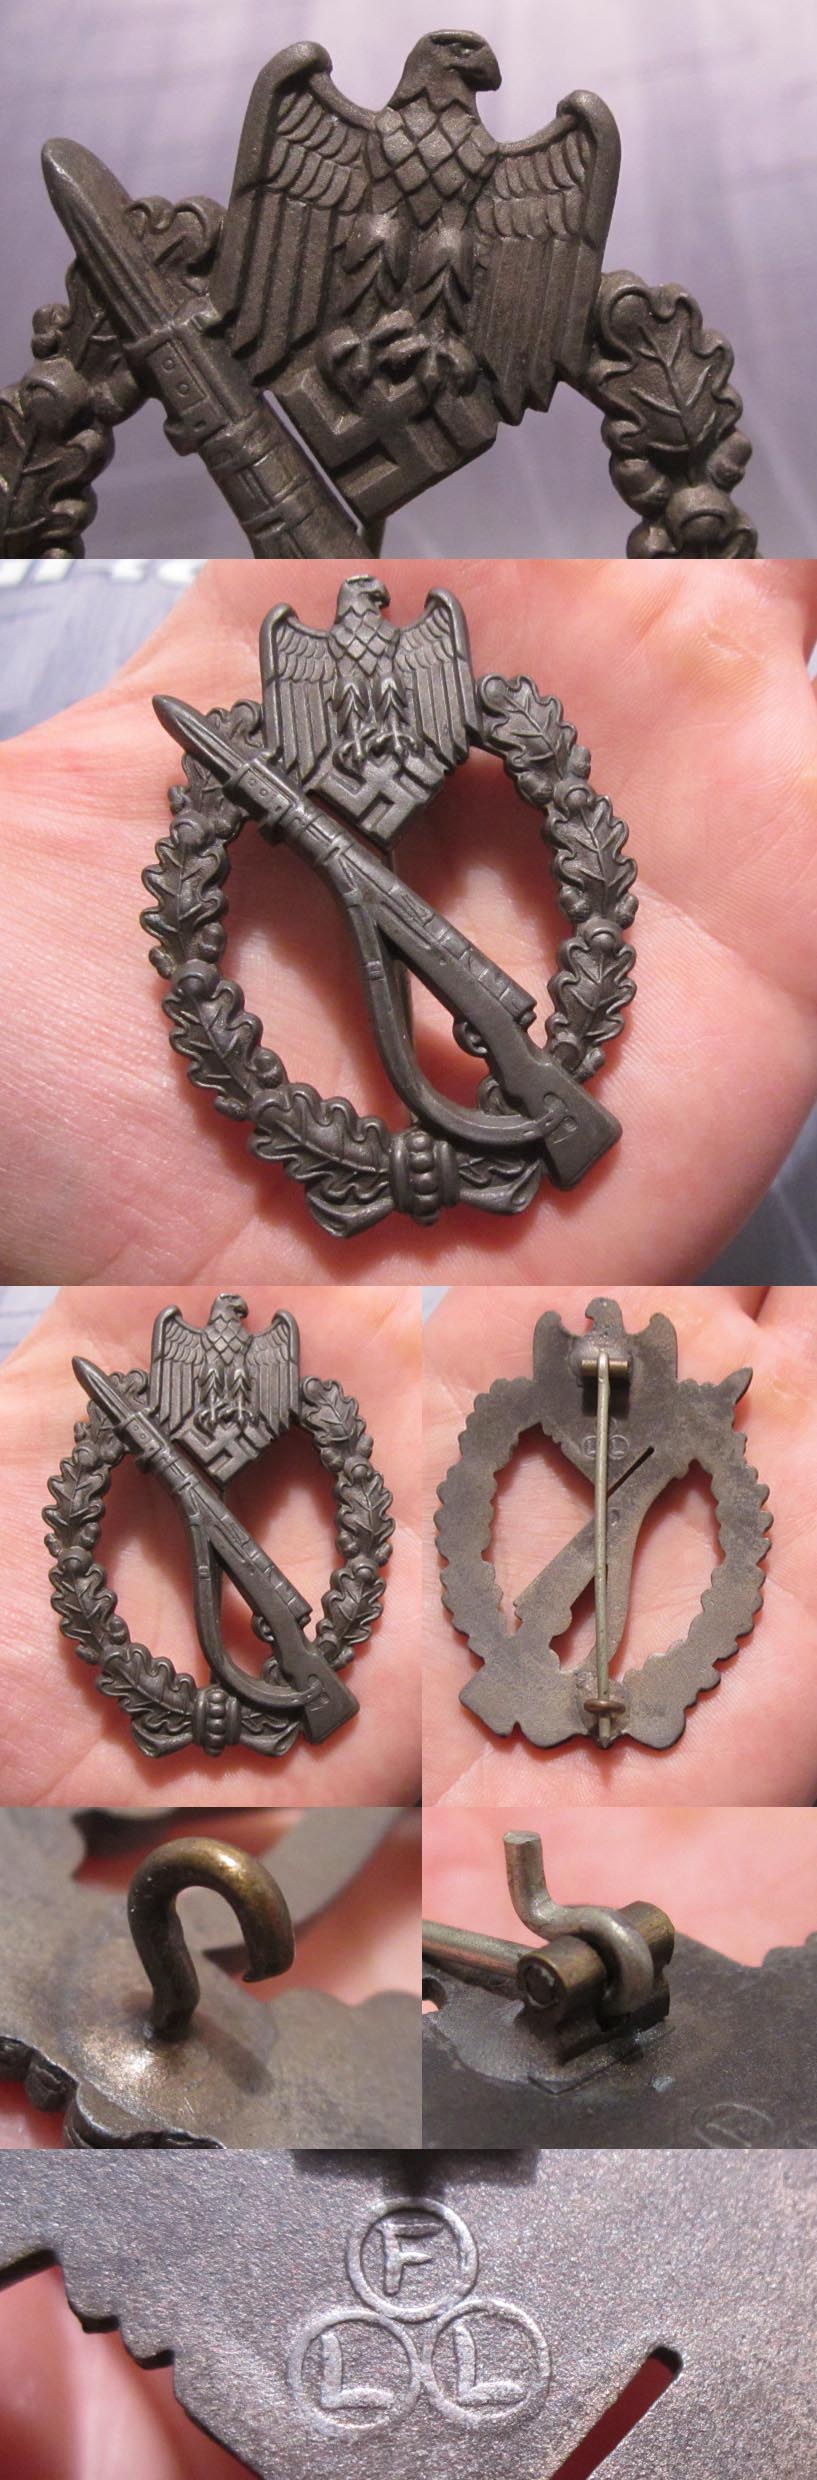 Infantry Assault Badge by FLL